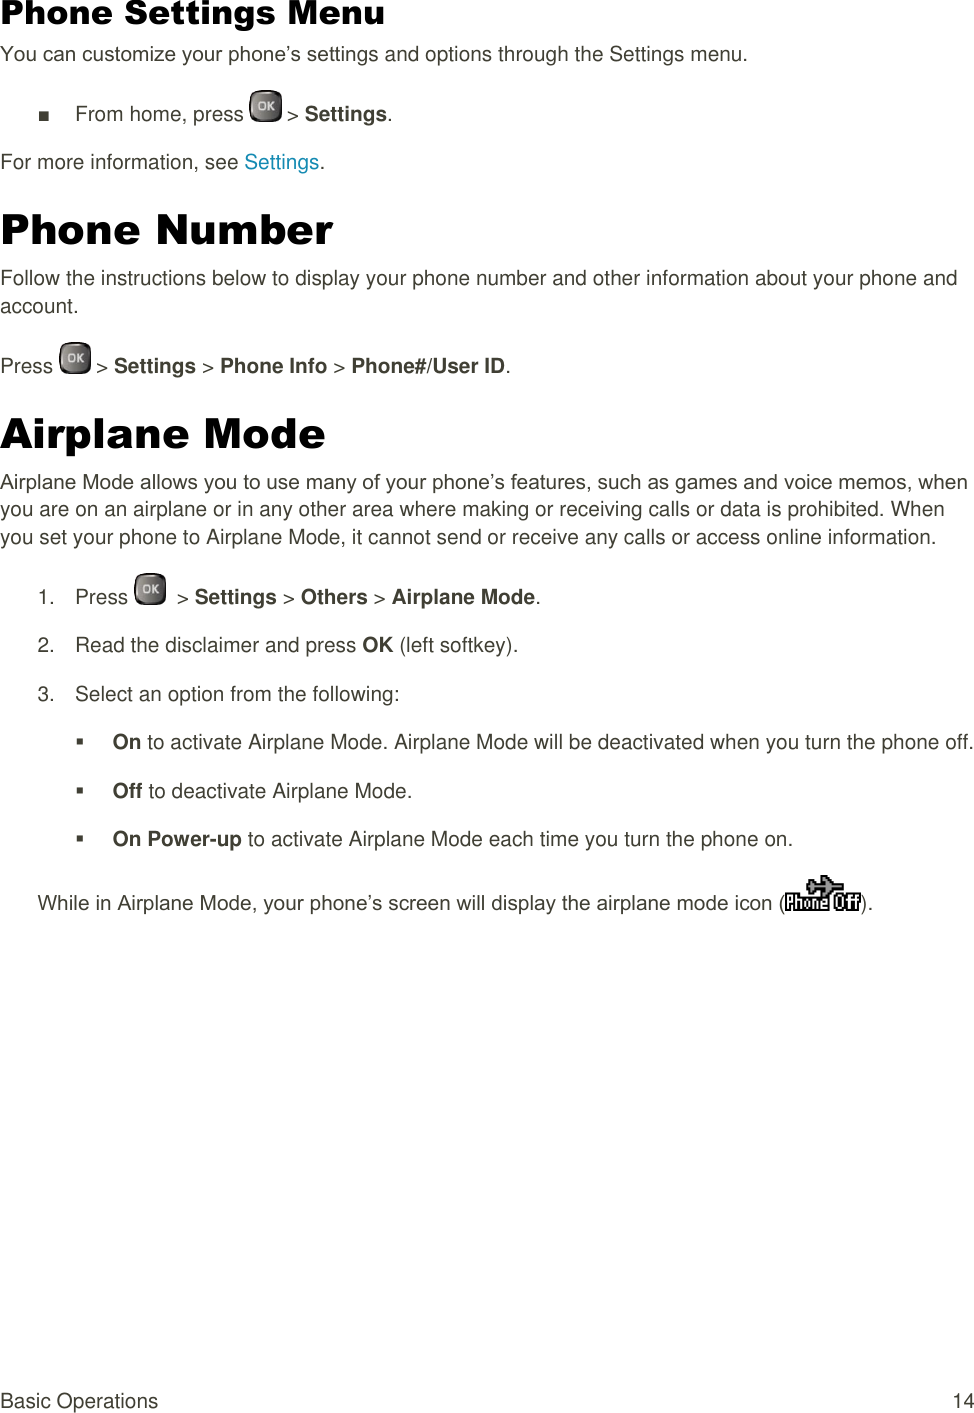  Basic Operations  14 Phone Settings Menu You can customize your phone’s settings and options through the Settings menu. ■  From home, press   &gt; Settings. For more information, see Settings. Phone Number Follow the instructions below to display your phone number and other information about your phone and account. Press   &gt; Settings &gt; Phone Info &gt; Phone#/User ID. Airplane Mode Airplane Mode allows you to use many of your phone’s features, such as games and voice memos, when you are on an airplane or in any other area where making or receiving calls or data is prohibited. When you set your phone to Airplane Mode, it cannot send or receive any calls or access online information. 1.  Press    &gt; Settings &gt; Others &gt; Airplane Mode. 2.  Read the disclaimer and press OK (left softkey). 3.  Select an option from the following:  On to activate Airplane Mode. Airplane Mode will be deactivated when you turn the phone off.  Off to deactivate Airplane Mode.  On Power-up to activate Airplane Mode each time you turn the phone on. While in Airplane Mode, your phone’s screen will display the airplane mode icon ( ).